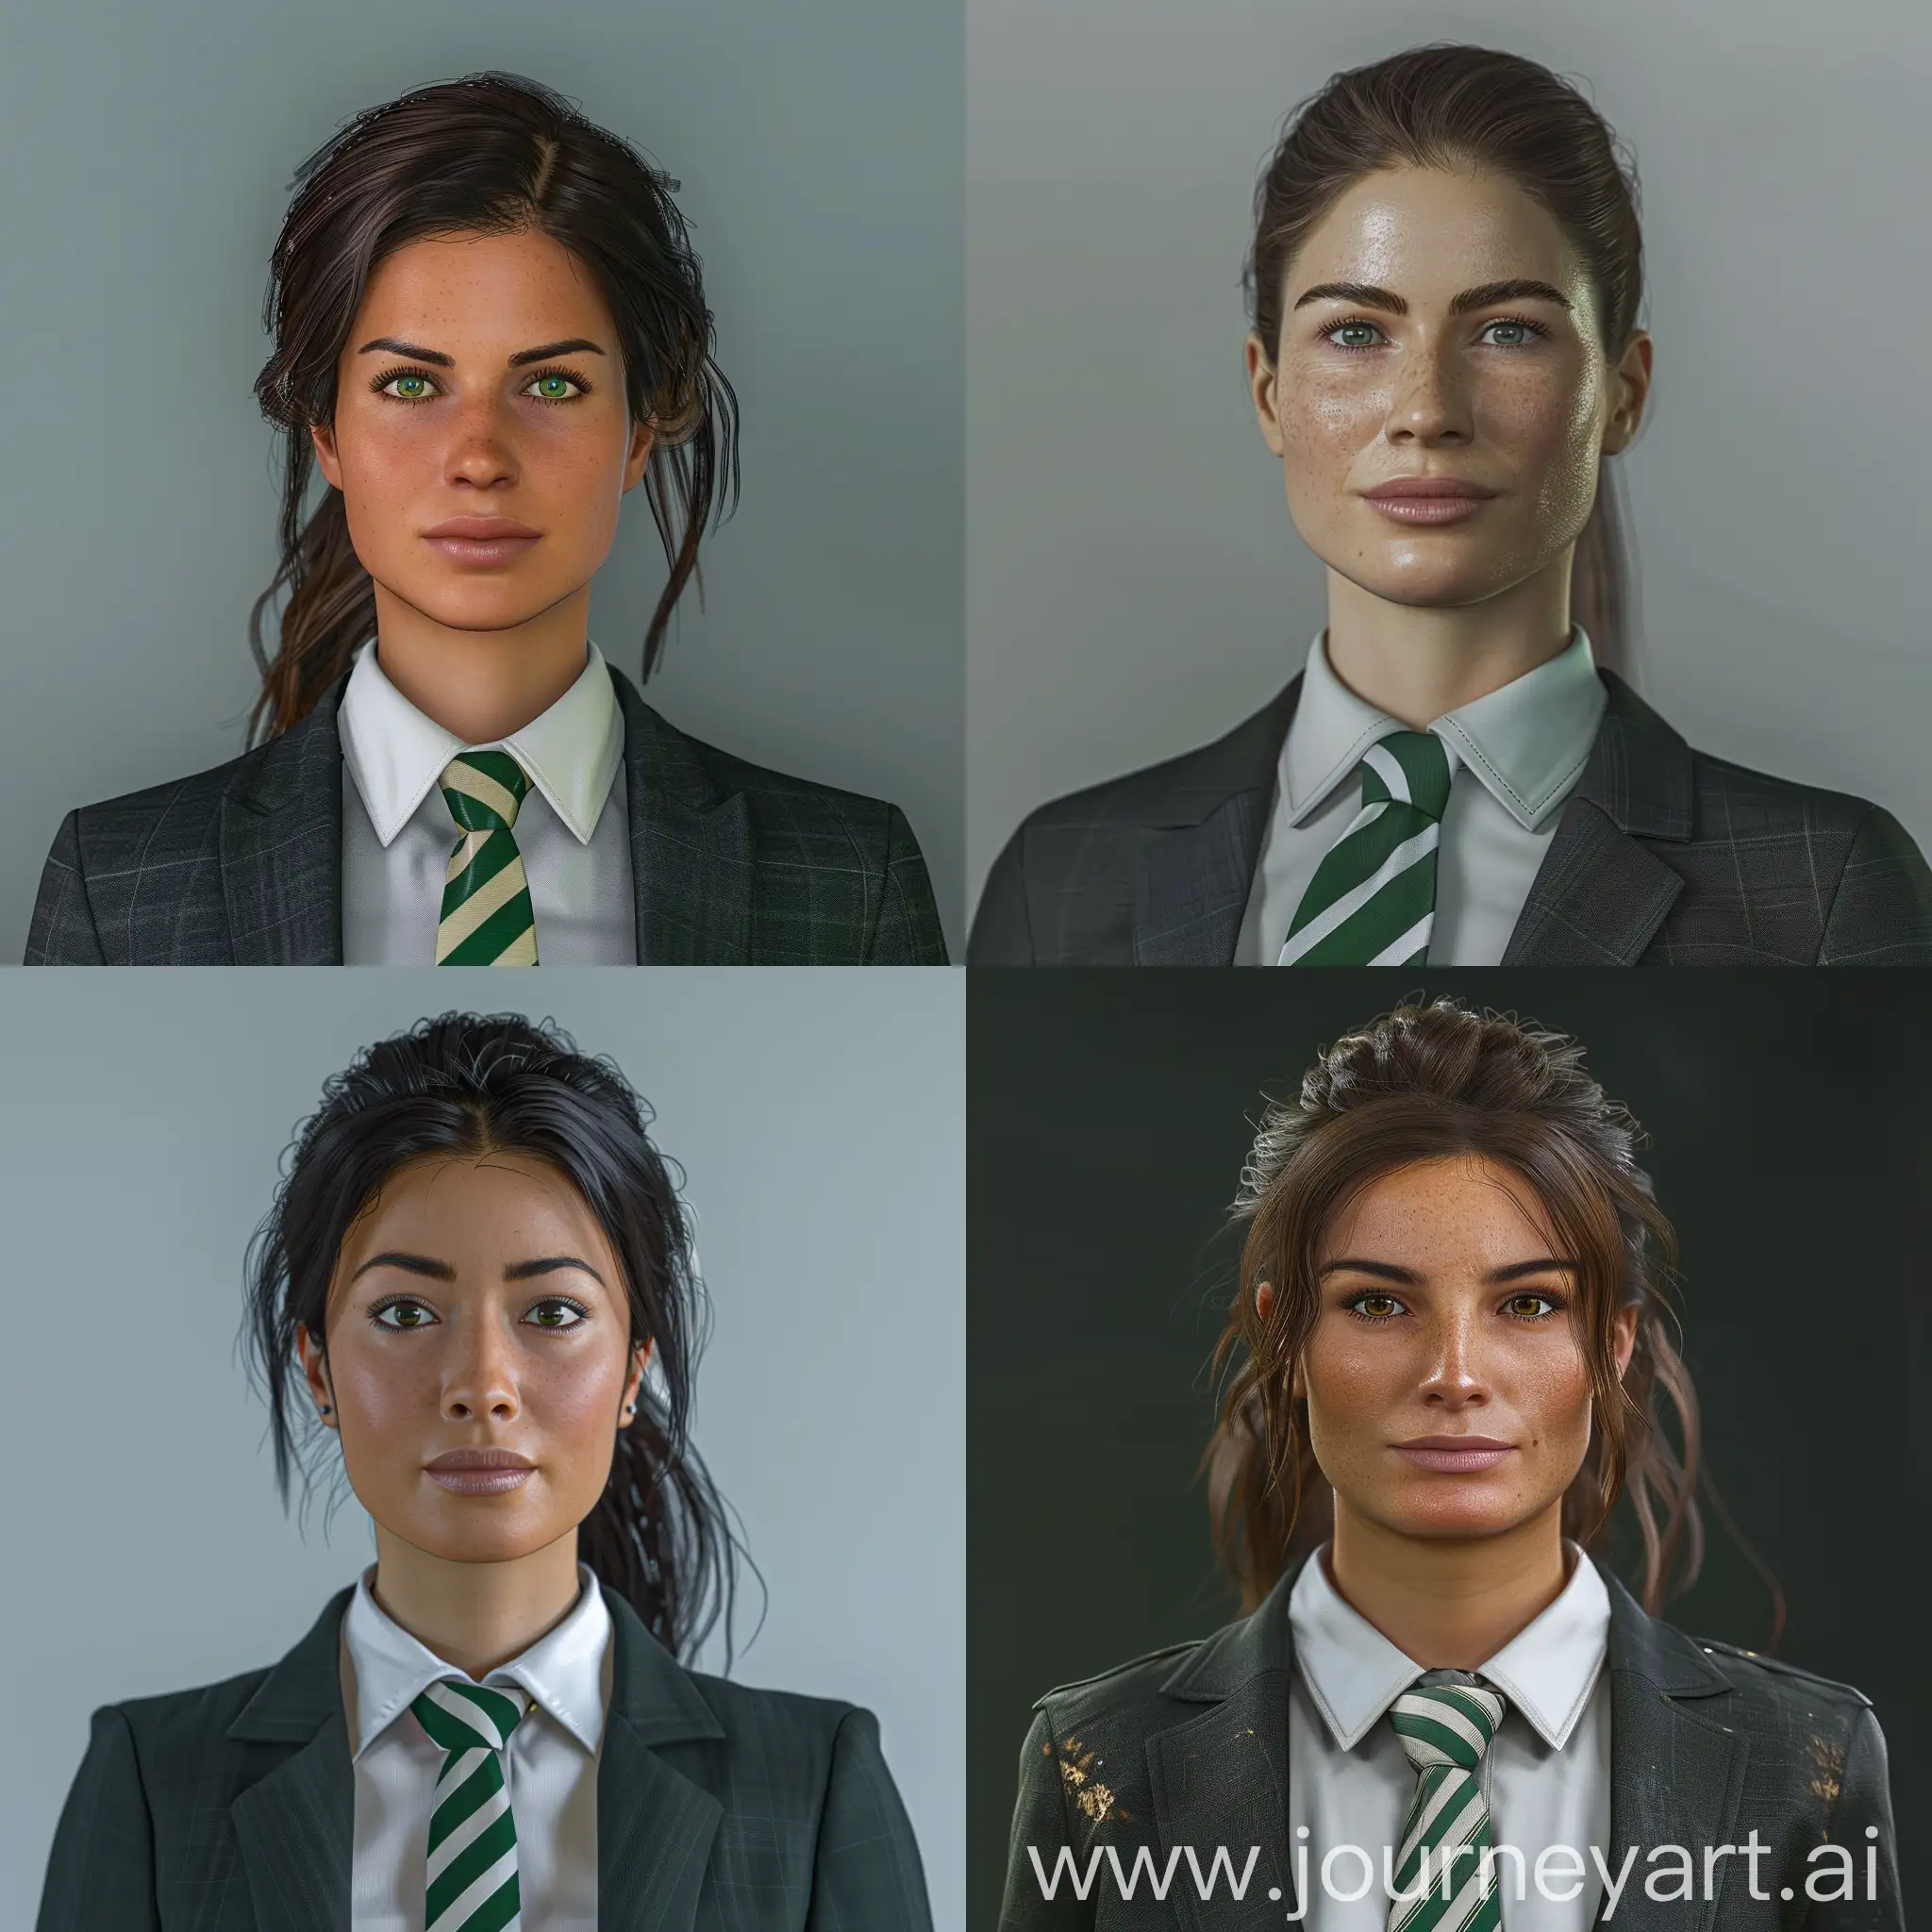 Ultra Realistic profile photo of the personal assistent to the manager of the football club Waltham Abbey. SHe is of British origin, in her early thirties, not beautiful but normal looking. Wears casual businesseswoman attire, reflecting that she works for a semi-professional football club. Suit and tie, green and white striped tie. In the style of facepack for game football manager 22.